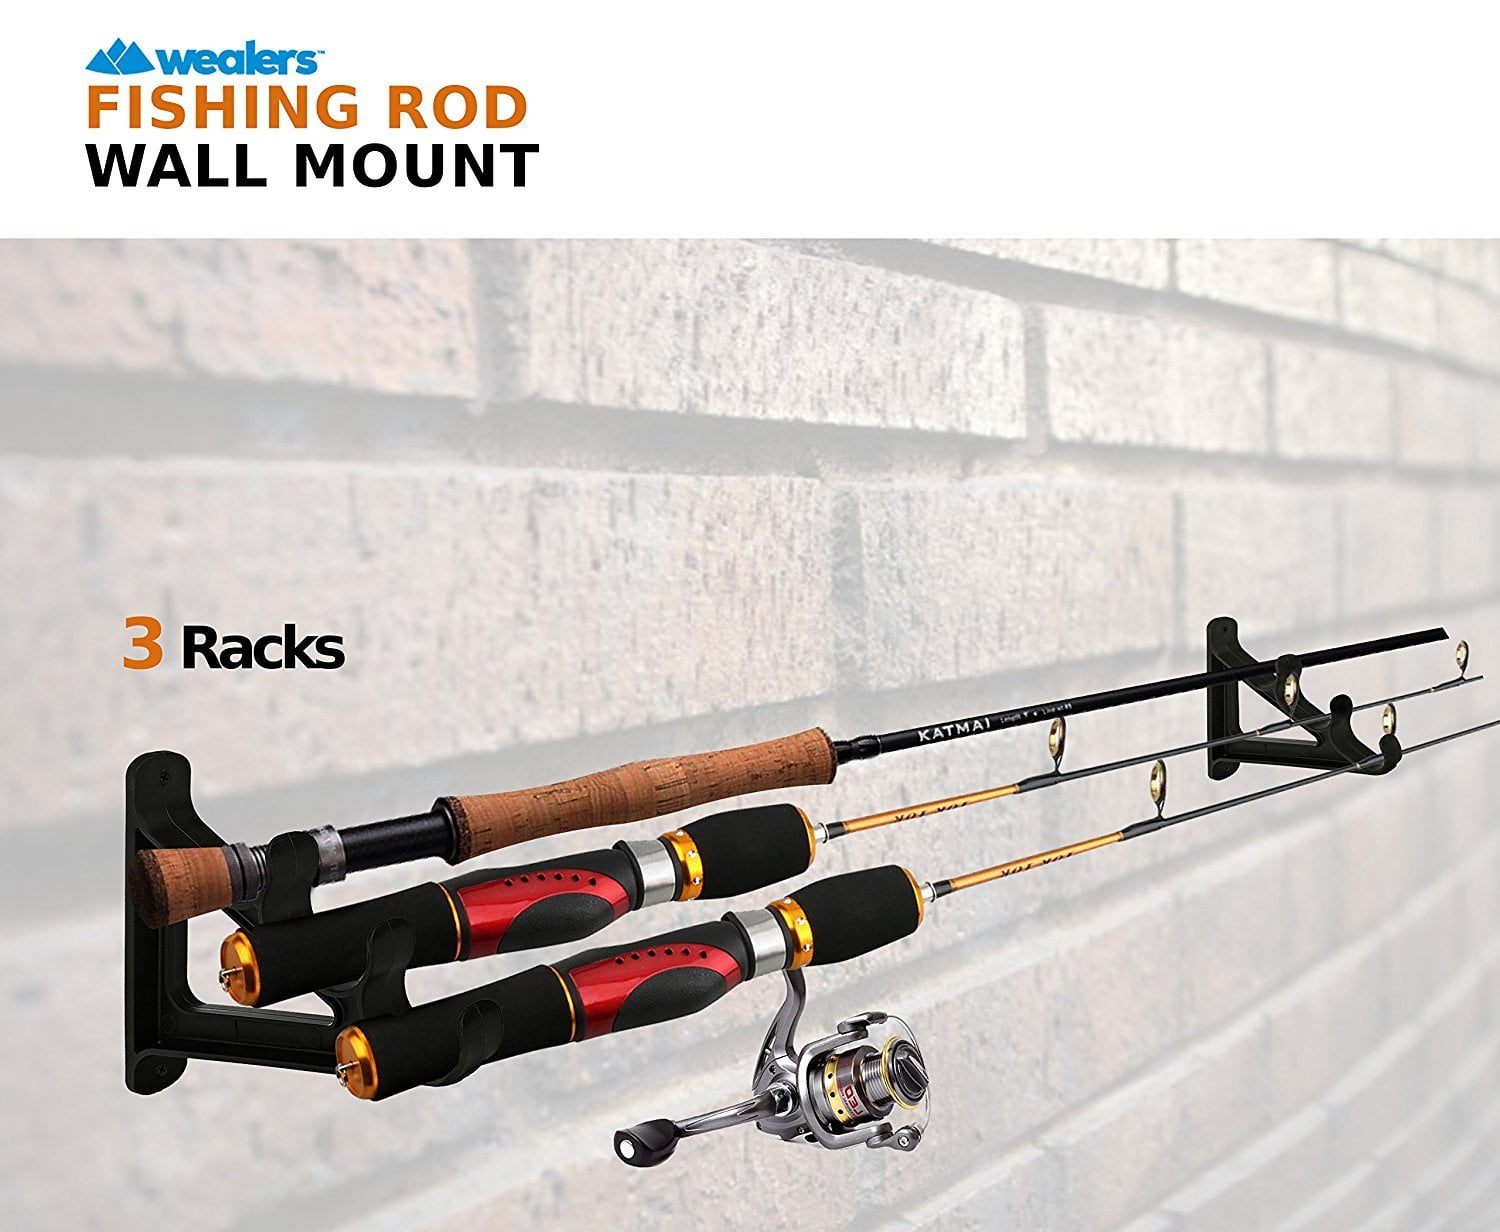 CAIKEI Horizontal Rod Rack for Fishing Rod Wall Rack Storage-Ultra Sturdy Strong Weatherproof Holds 3 Rods- Space Saving for Fishing Rods,Hiking Poles